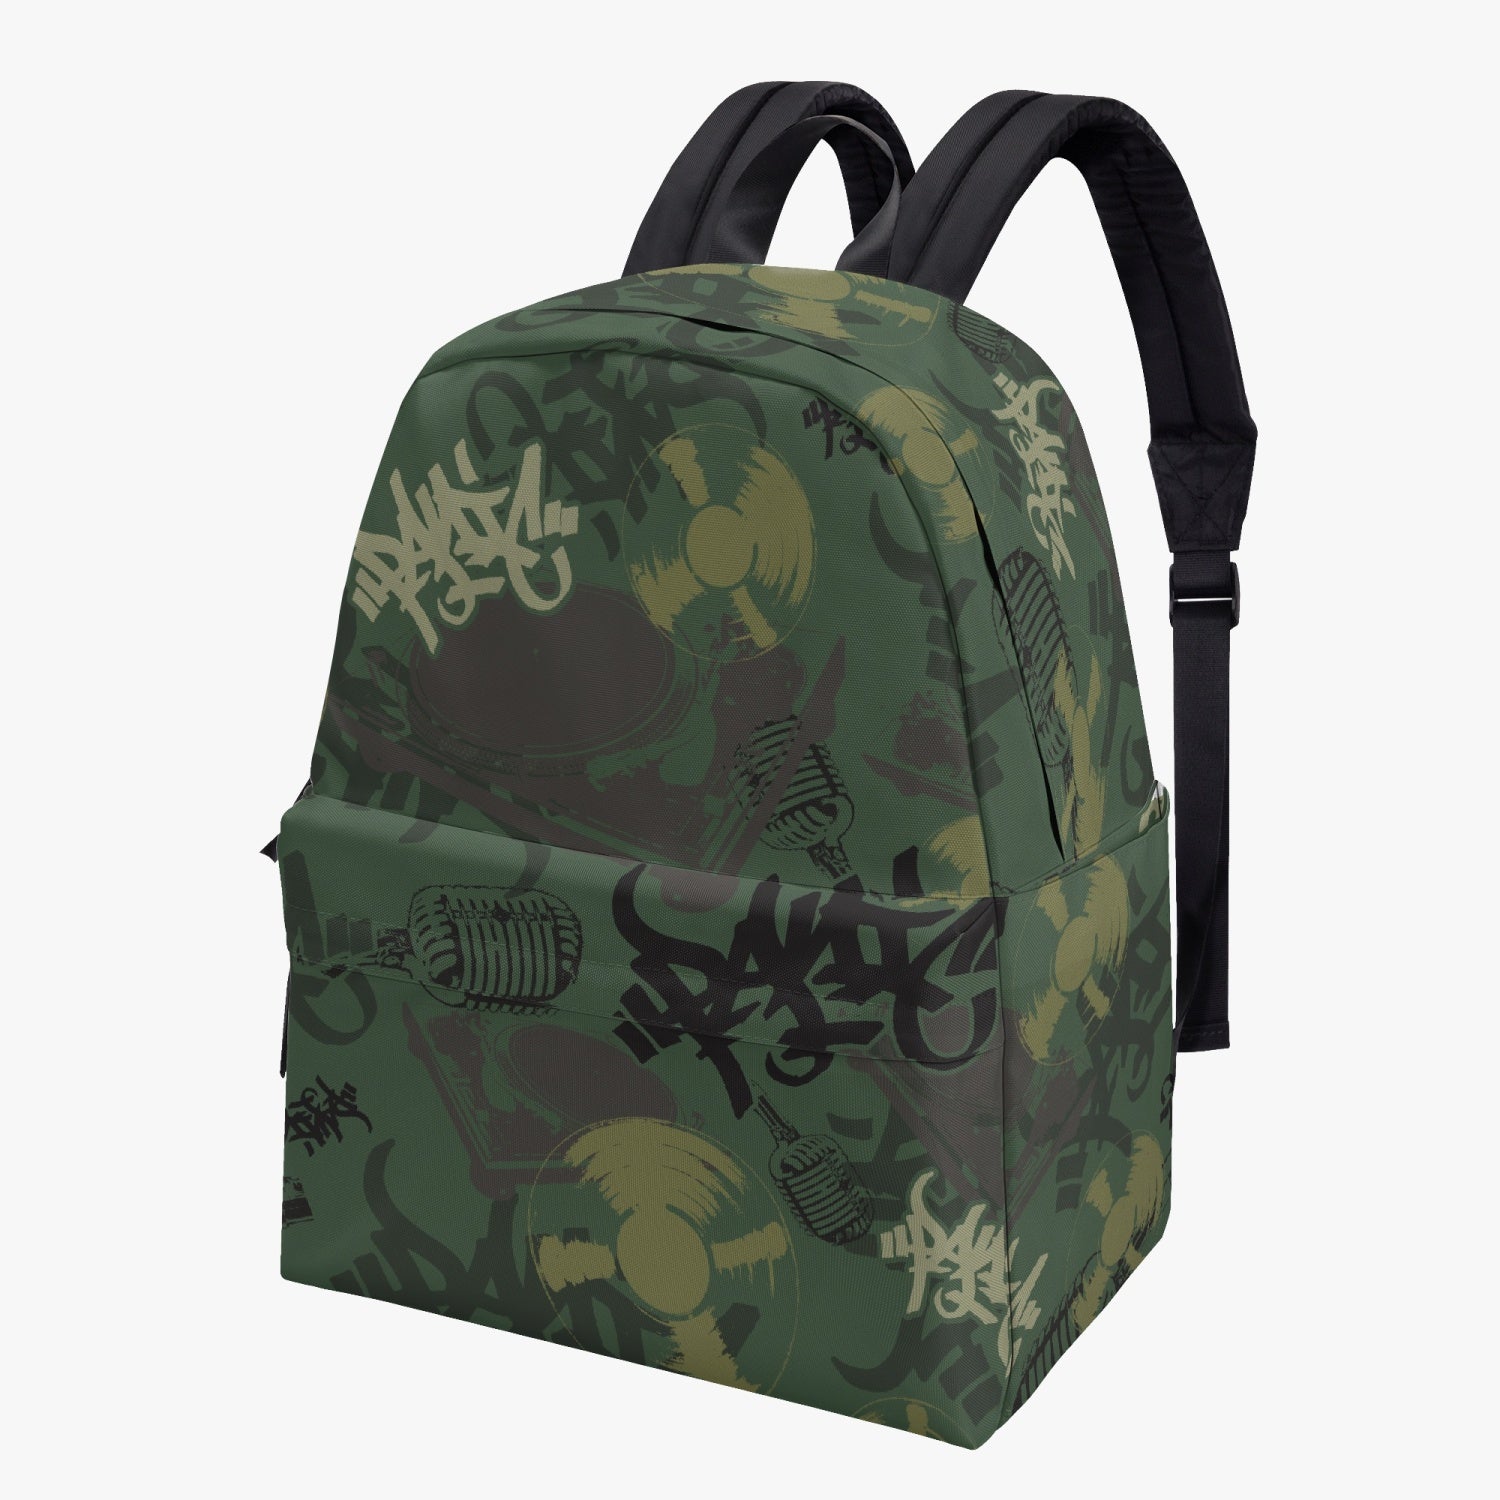 THE ELEMENT GREEN CAMO CANVAS BACKPACK - Panic 39